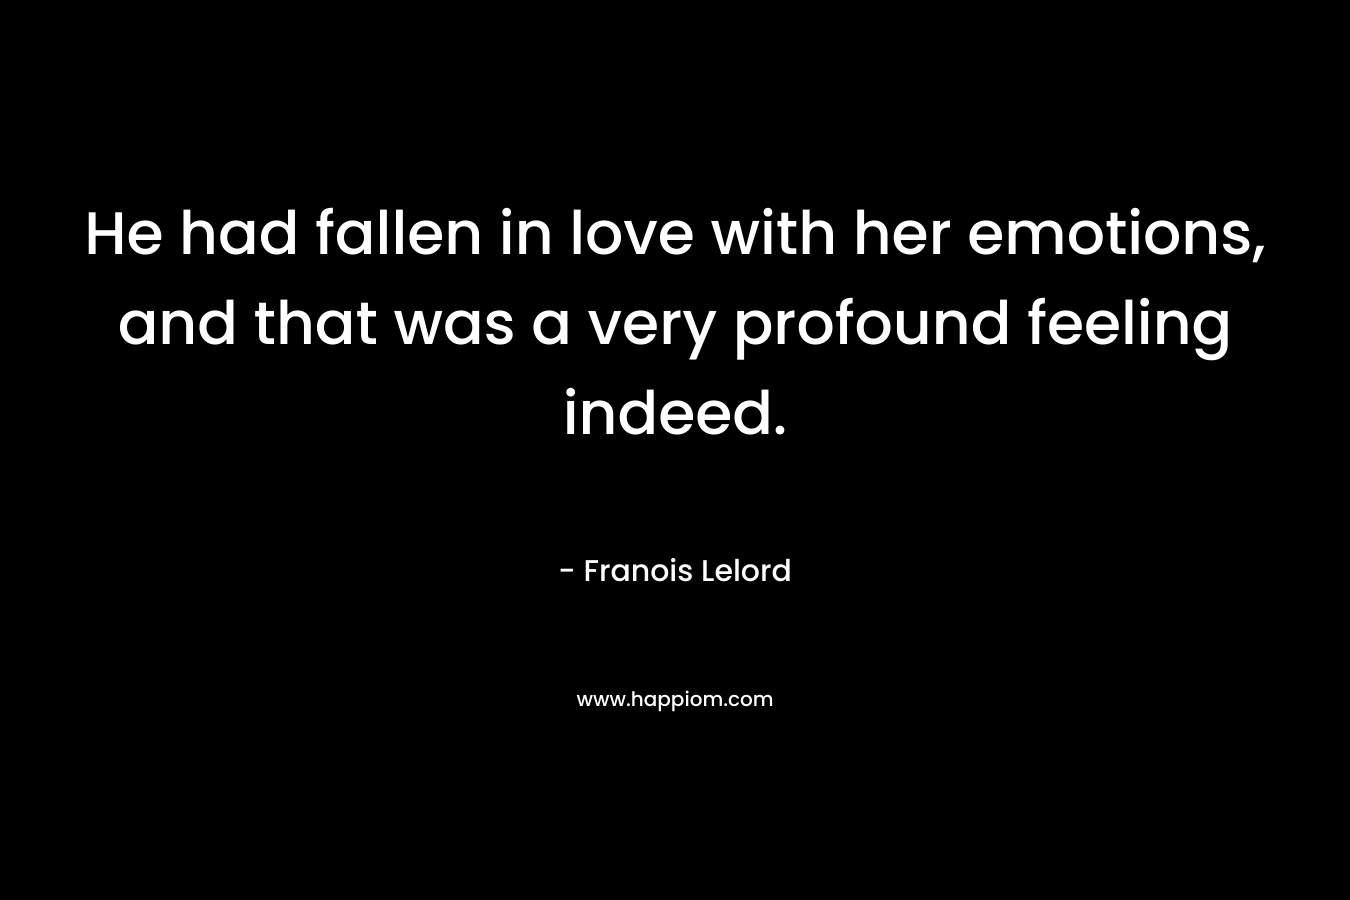 He had fallen in love with her emotions, and that was a very profound feeling indeed.